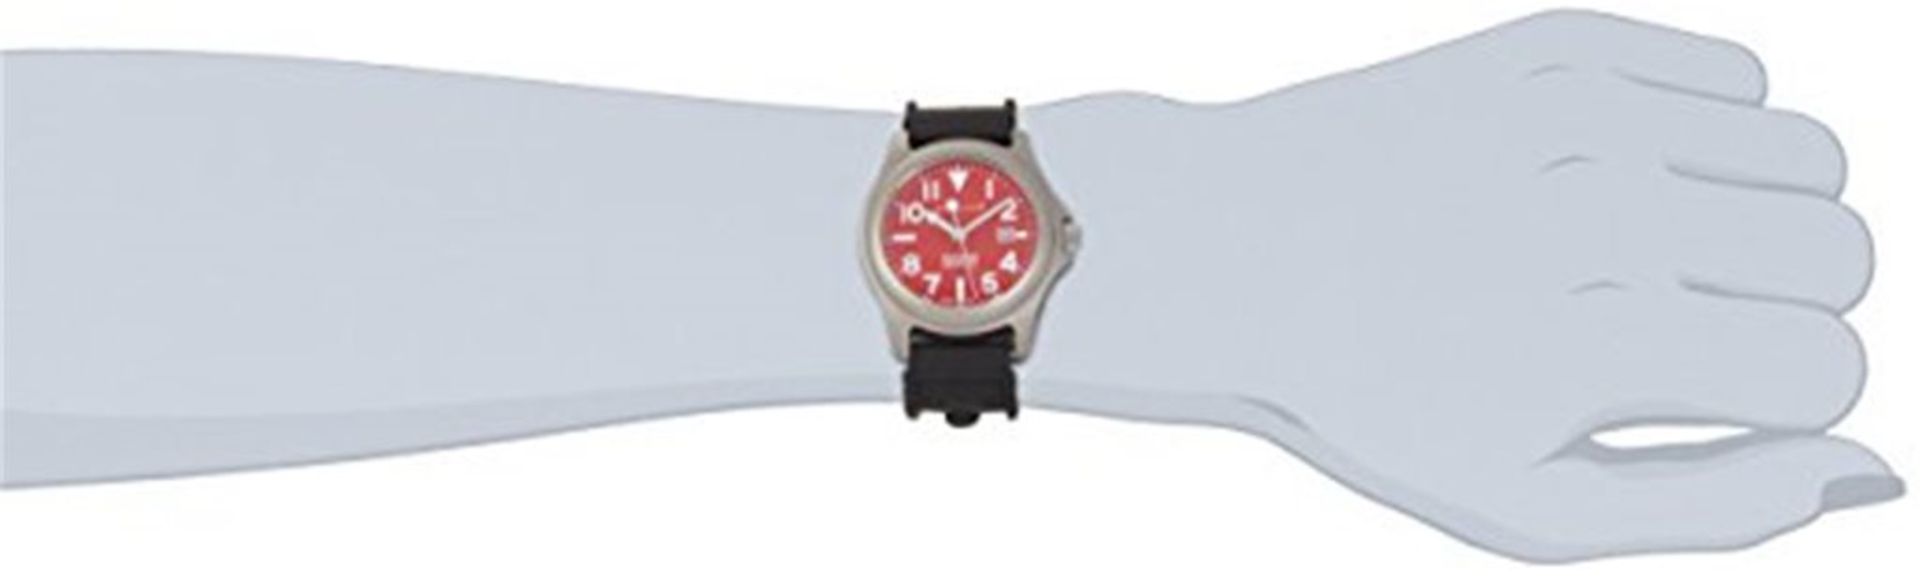 Box of 19 Discounted Watches from Nautica and more! Great Resell Potential! Details Inside - Image 17 of 38